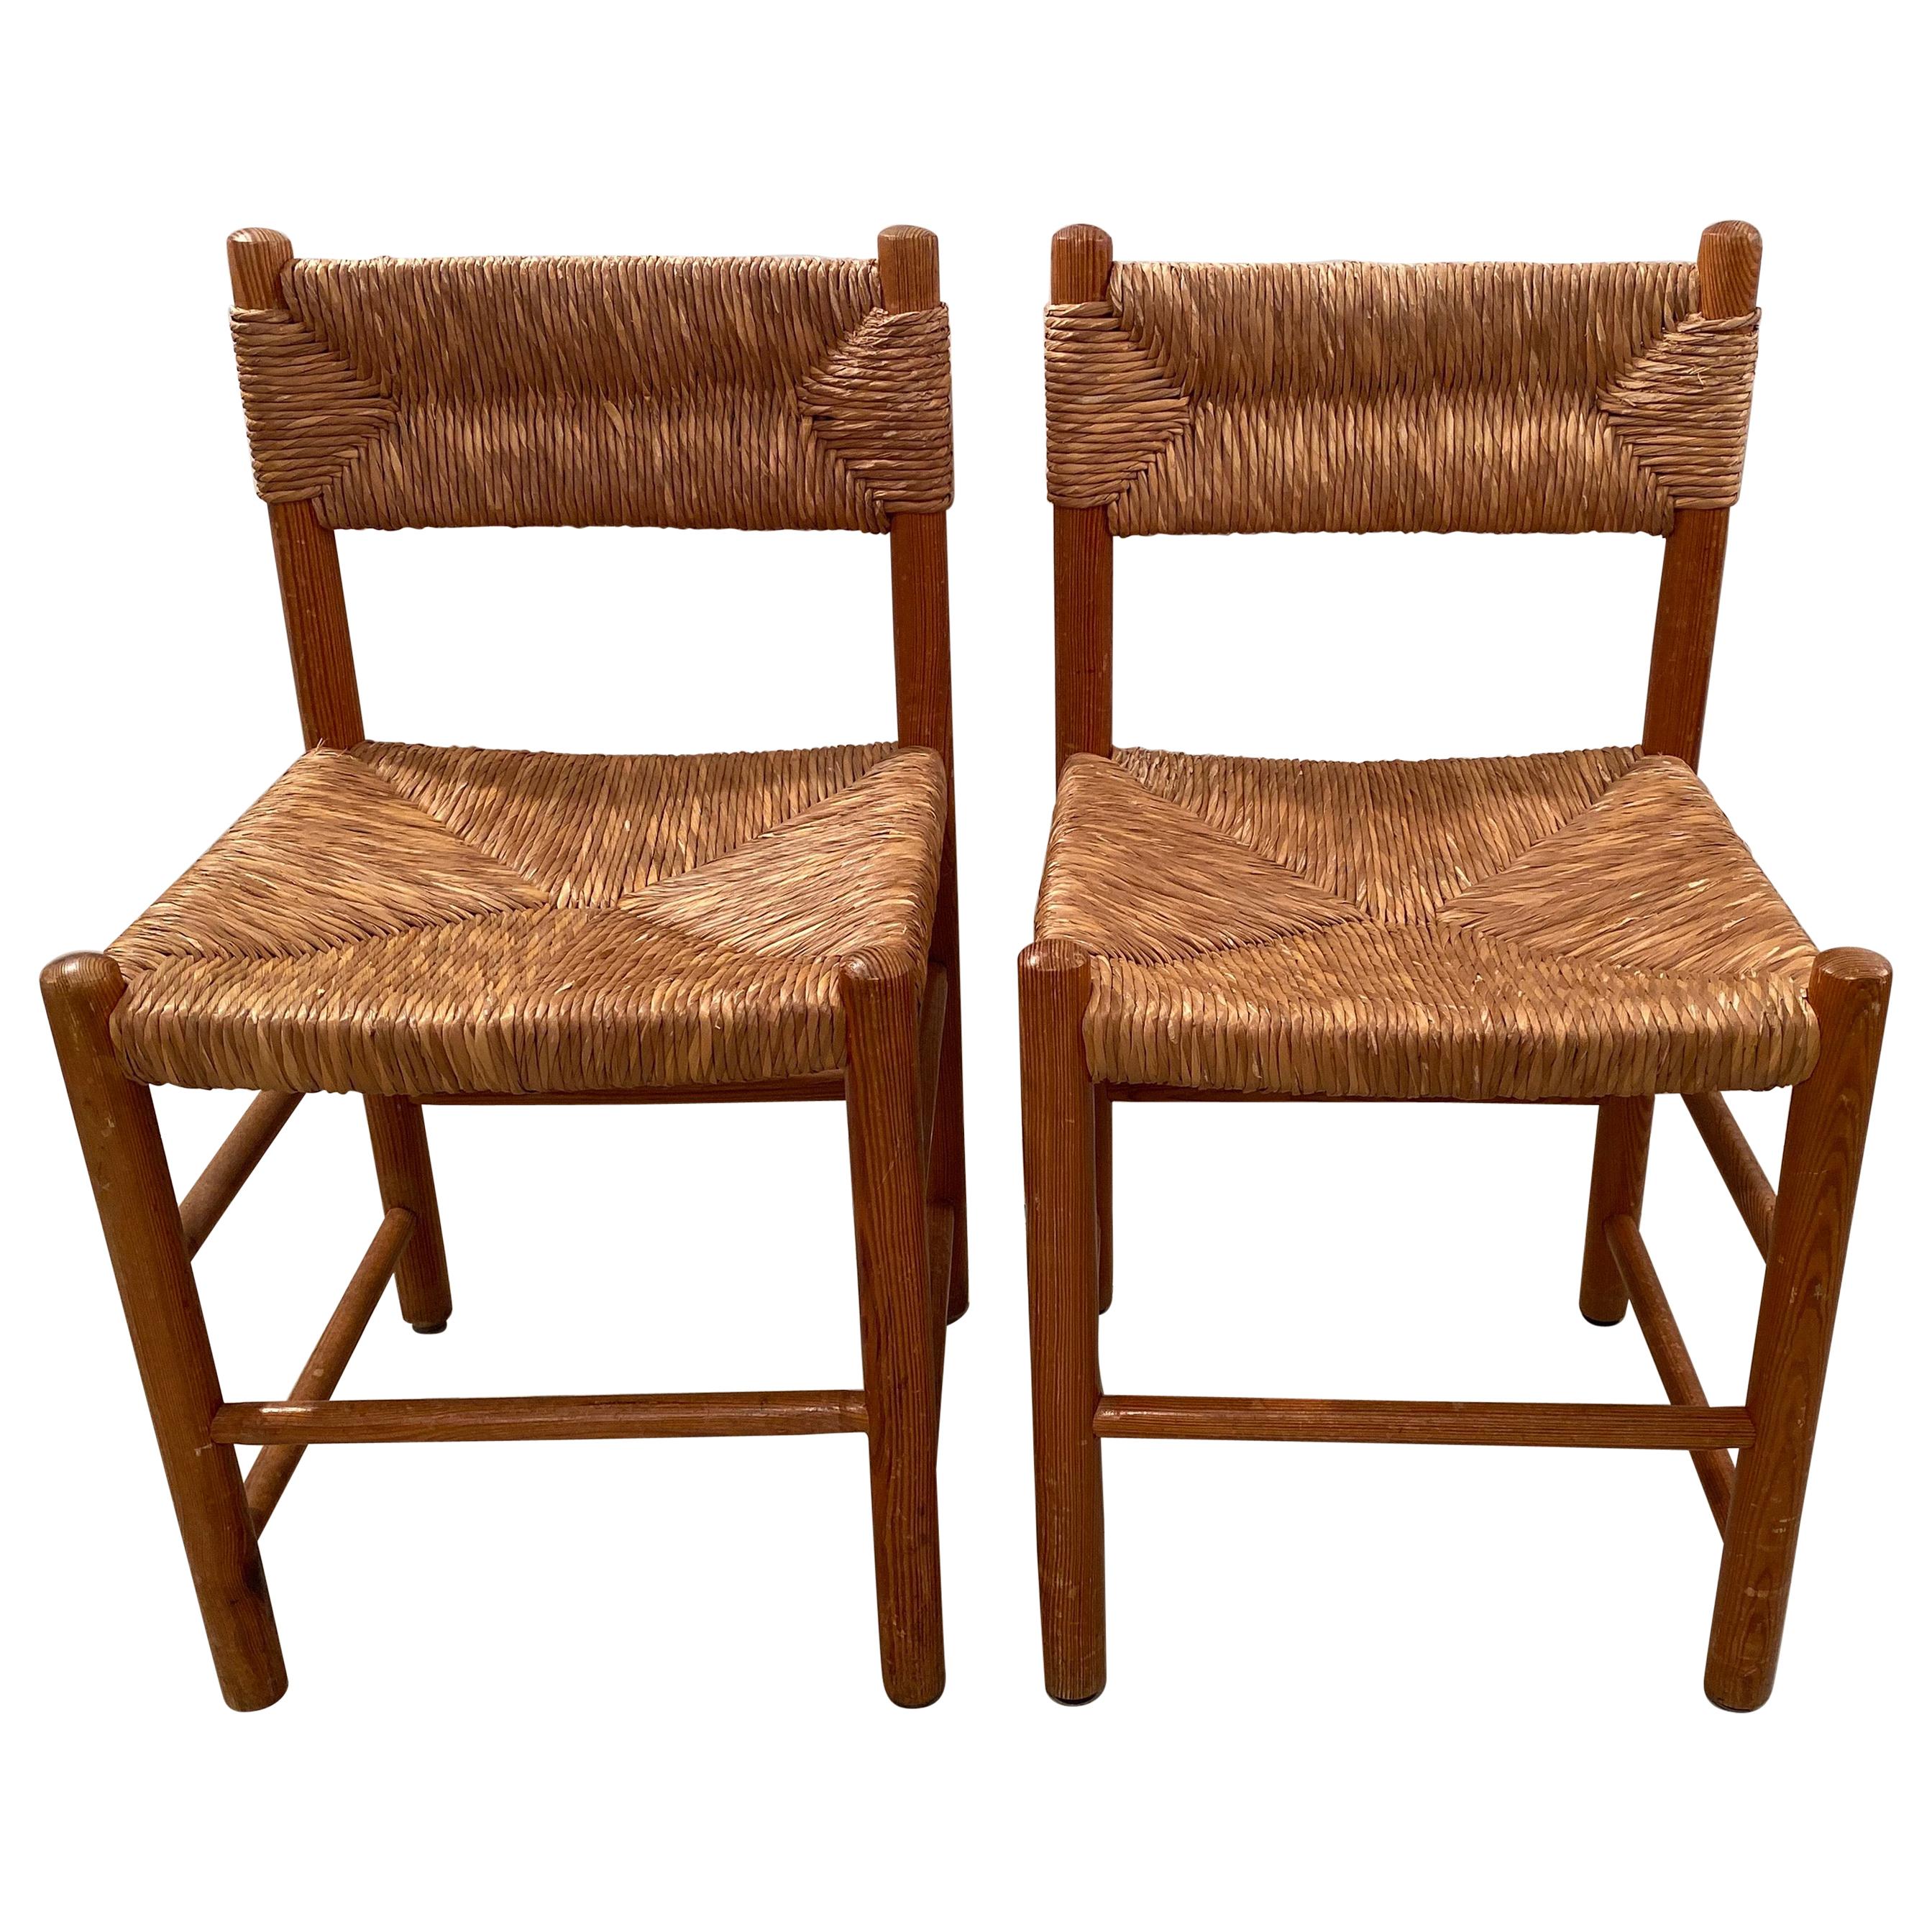 Pair of Wicker Dordogne Chairs by Charlotte Perriand for Sentou, 1950s For Sale